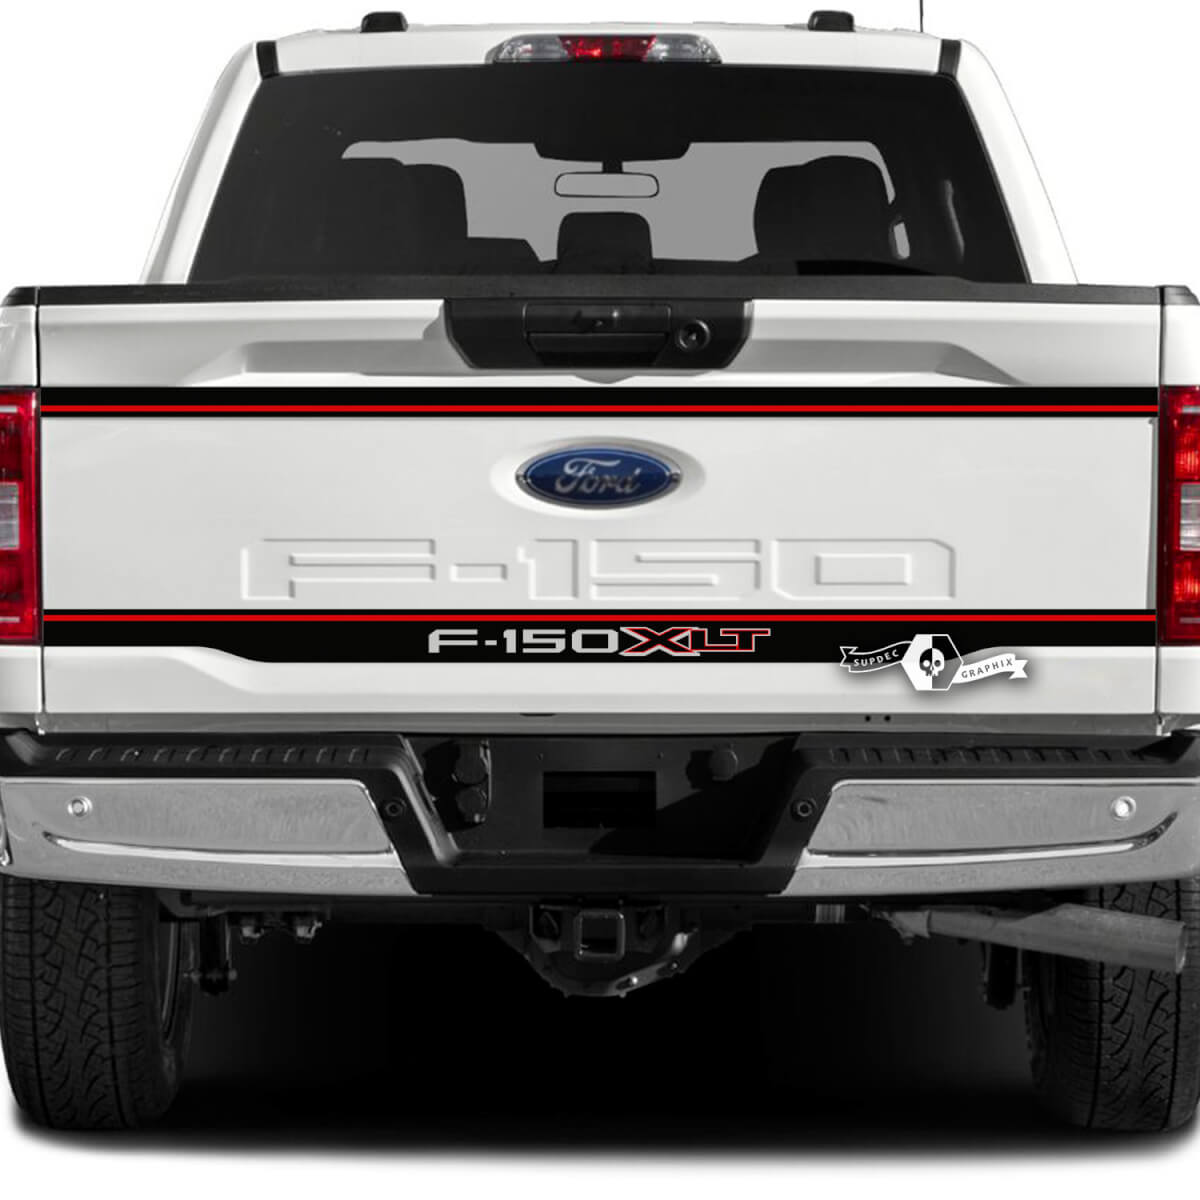 Ford F-150 XLT Tailgate Stripe Logo Graphics Side Decals Sticker 2 ColorsVehicle Parts & Accessories, Car Tuning & Styling, Body & Exterior Styling!
